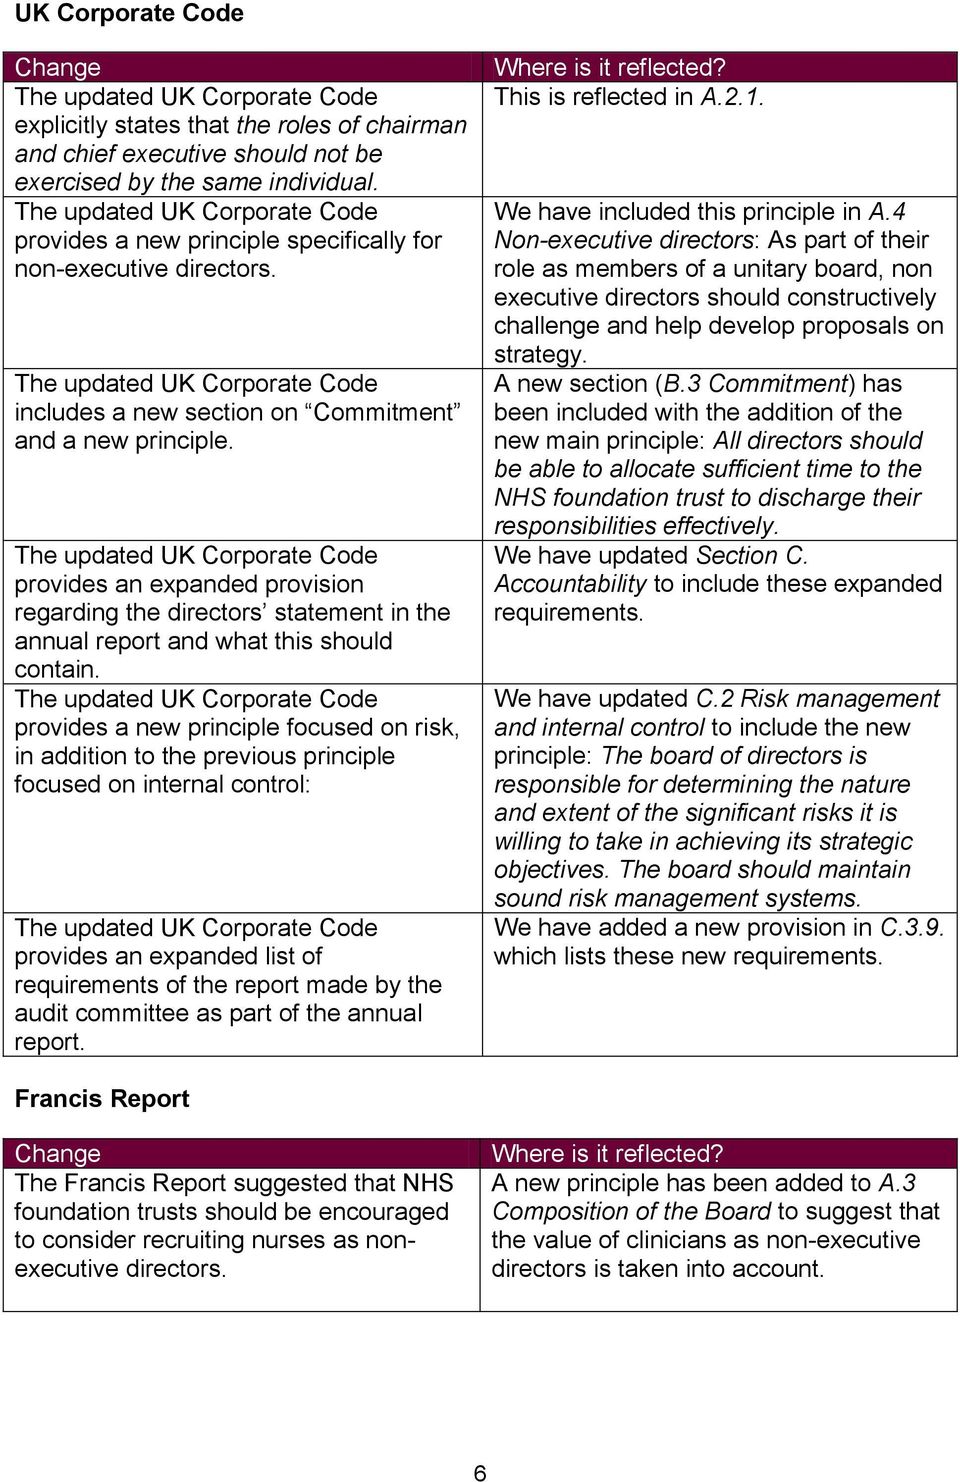 The updated UK Corporate Code provides an expanded provision regarding the directors statement in the annual report and what this should contain.